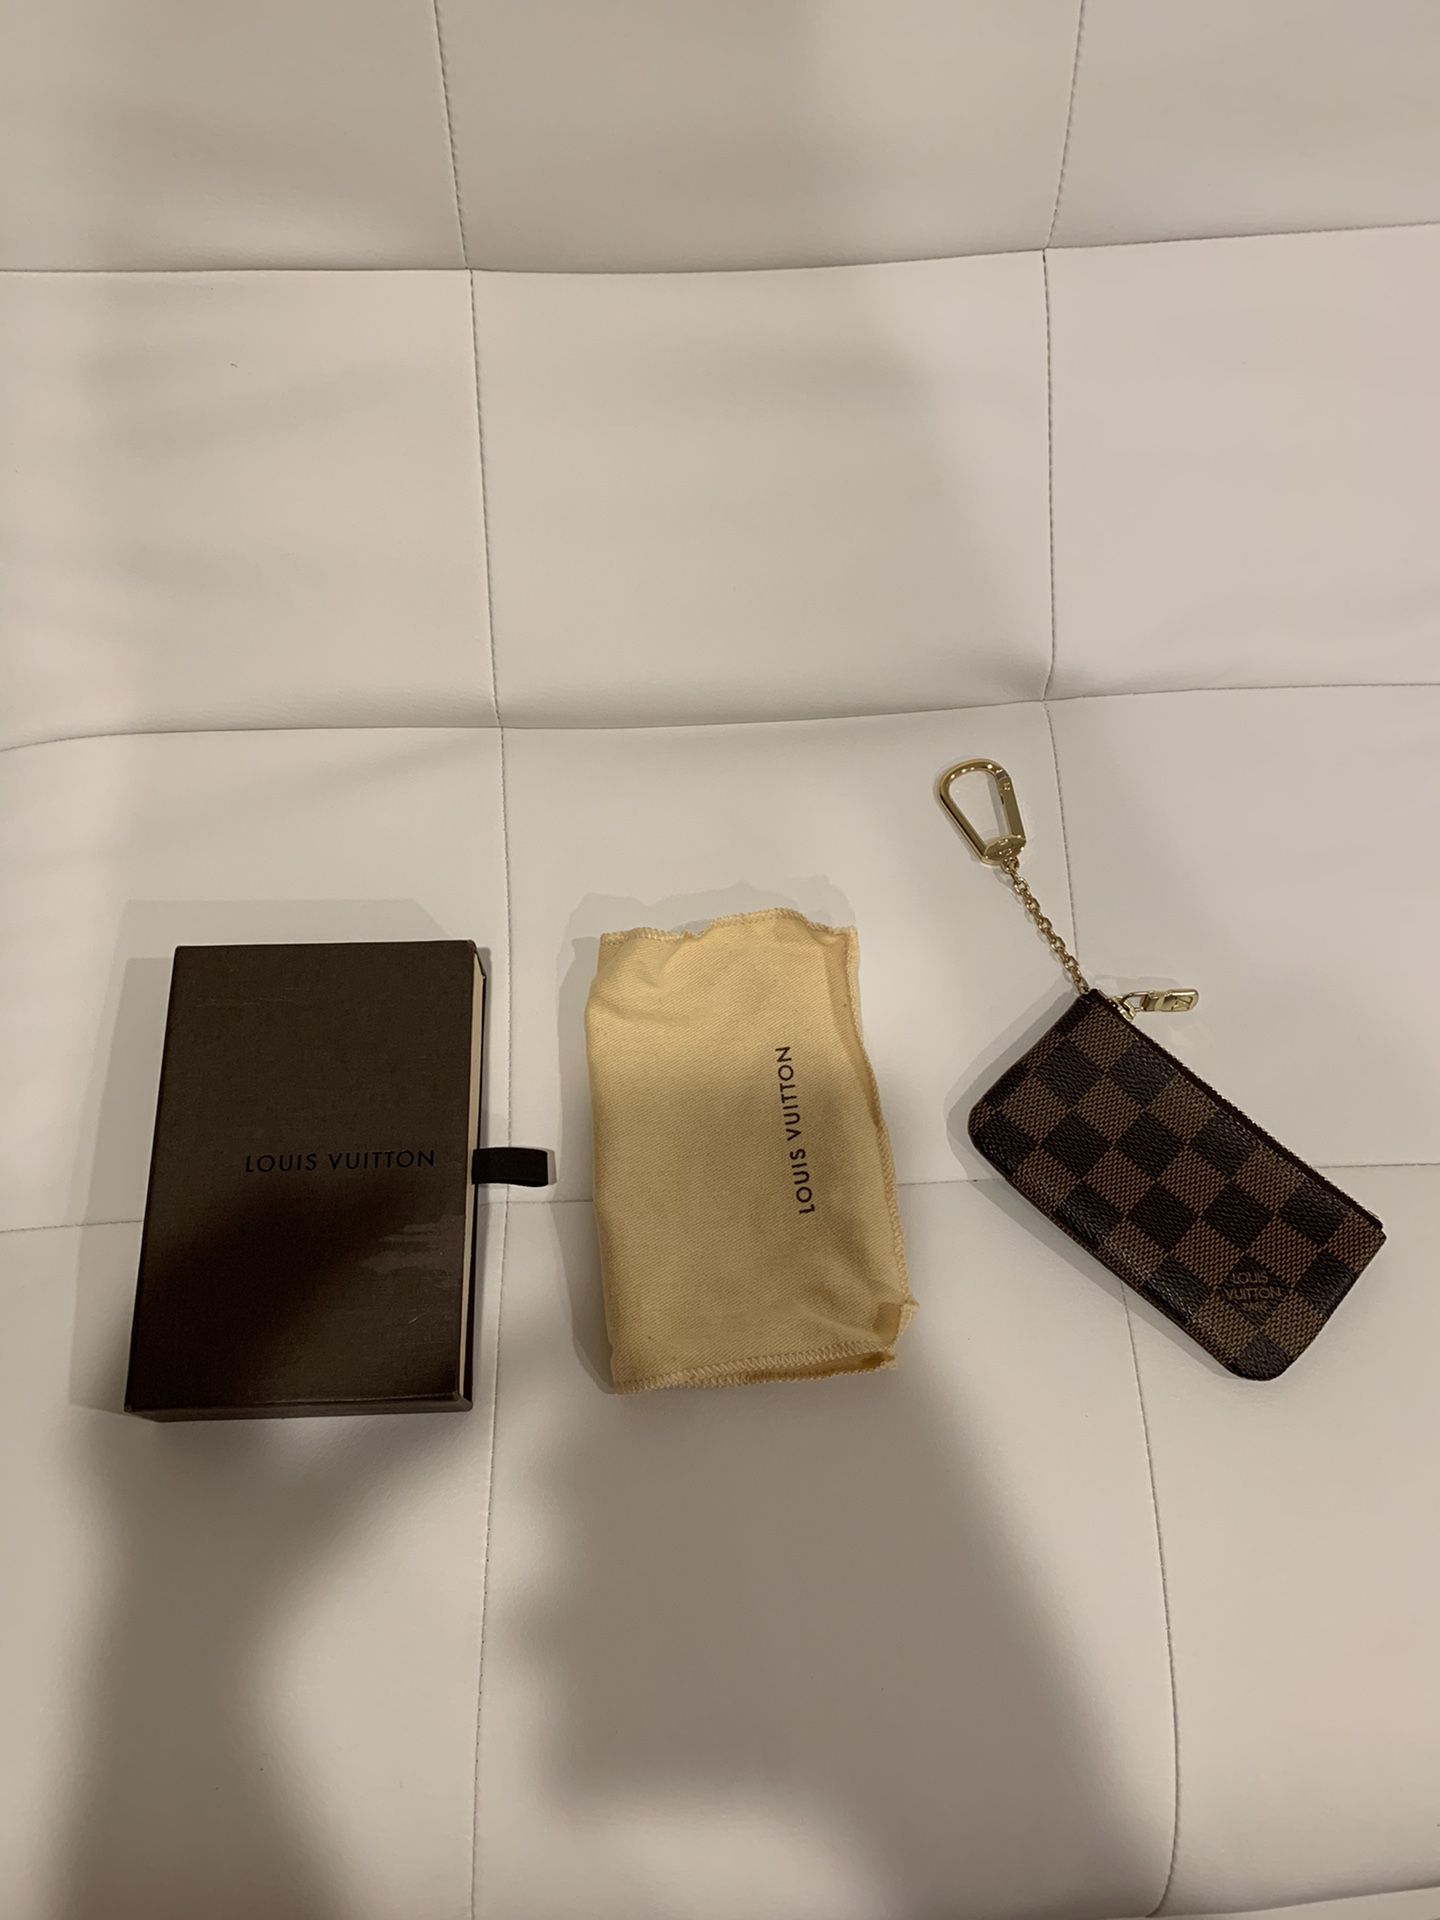 Authentic Louis Vuitton key/coin pouch like new